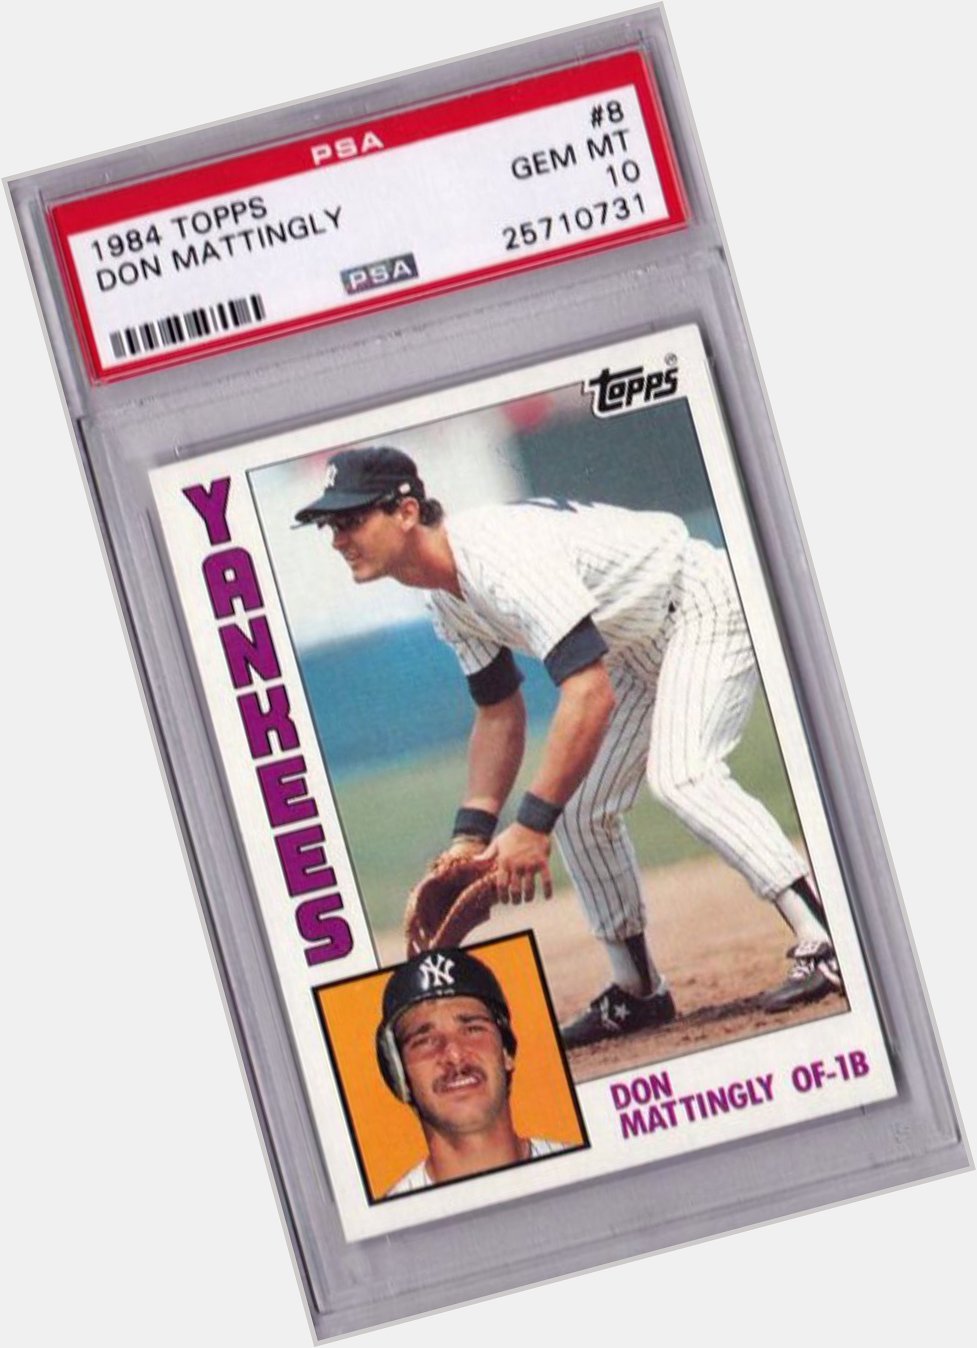 Lets celebrate this great day. Happy Birthday to Don Mattingly. Born on 4/20! 